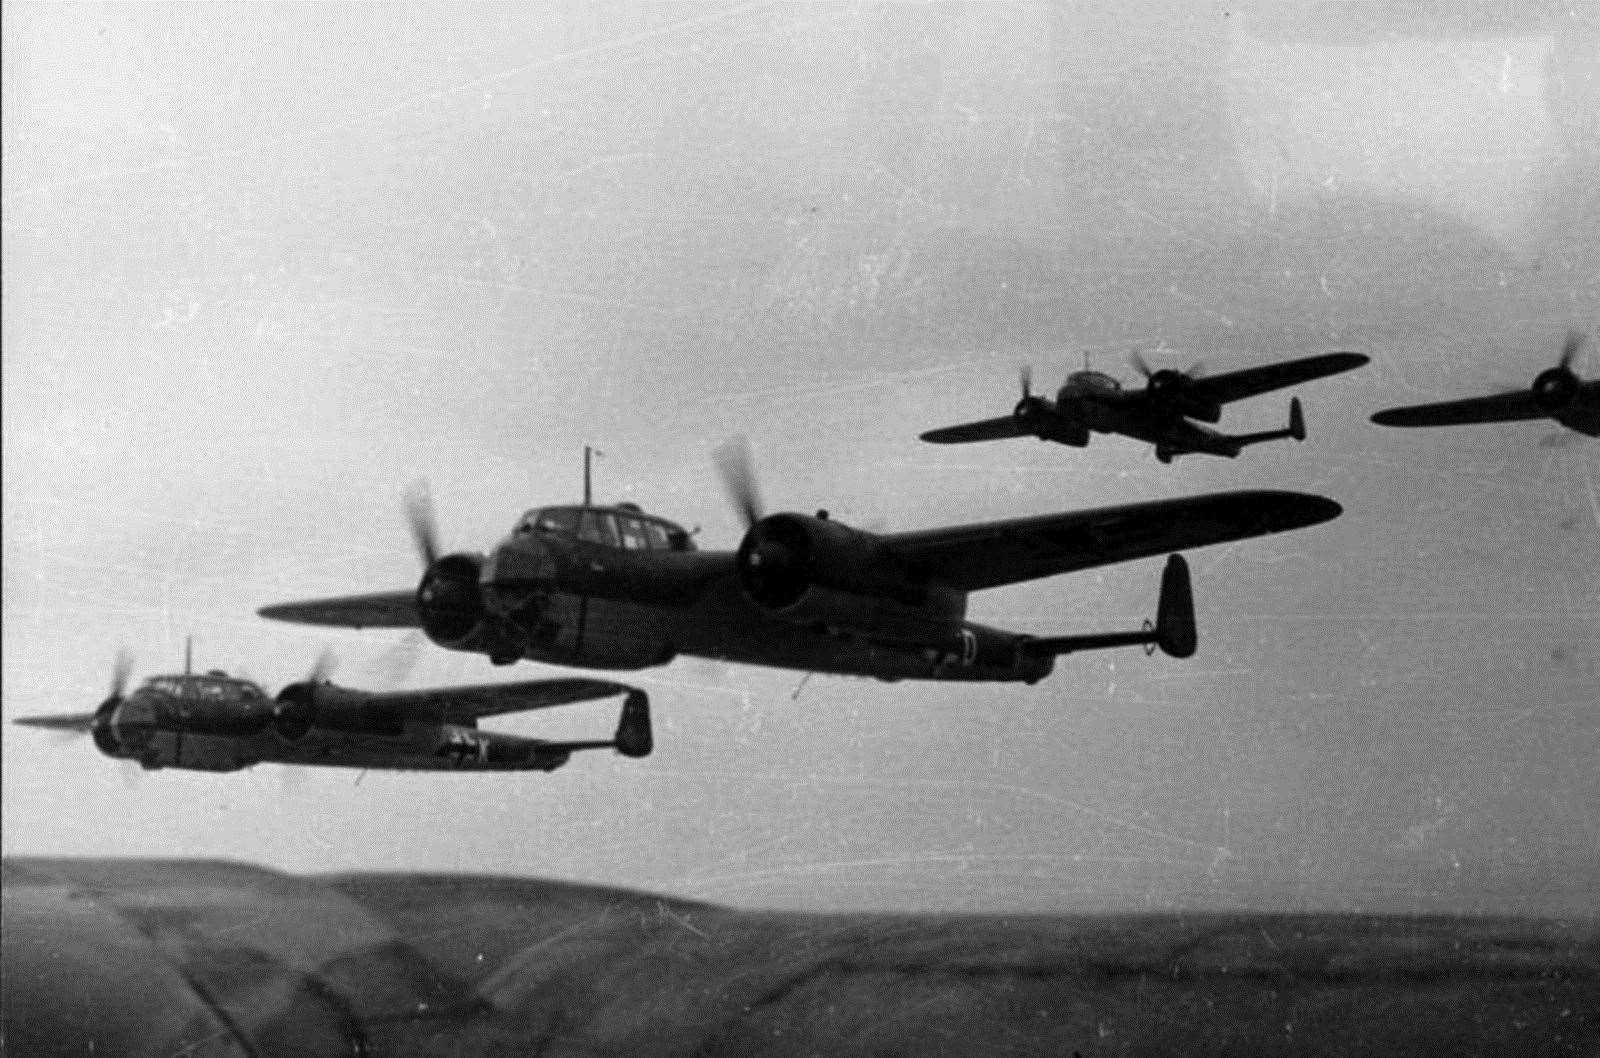 A flight of Dornier 17 bombers over England in 1940